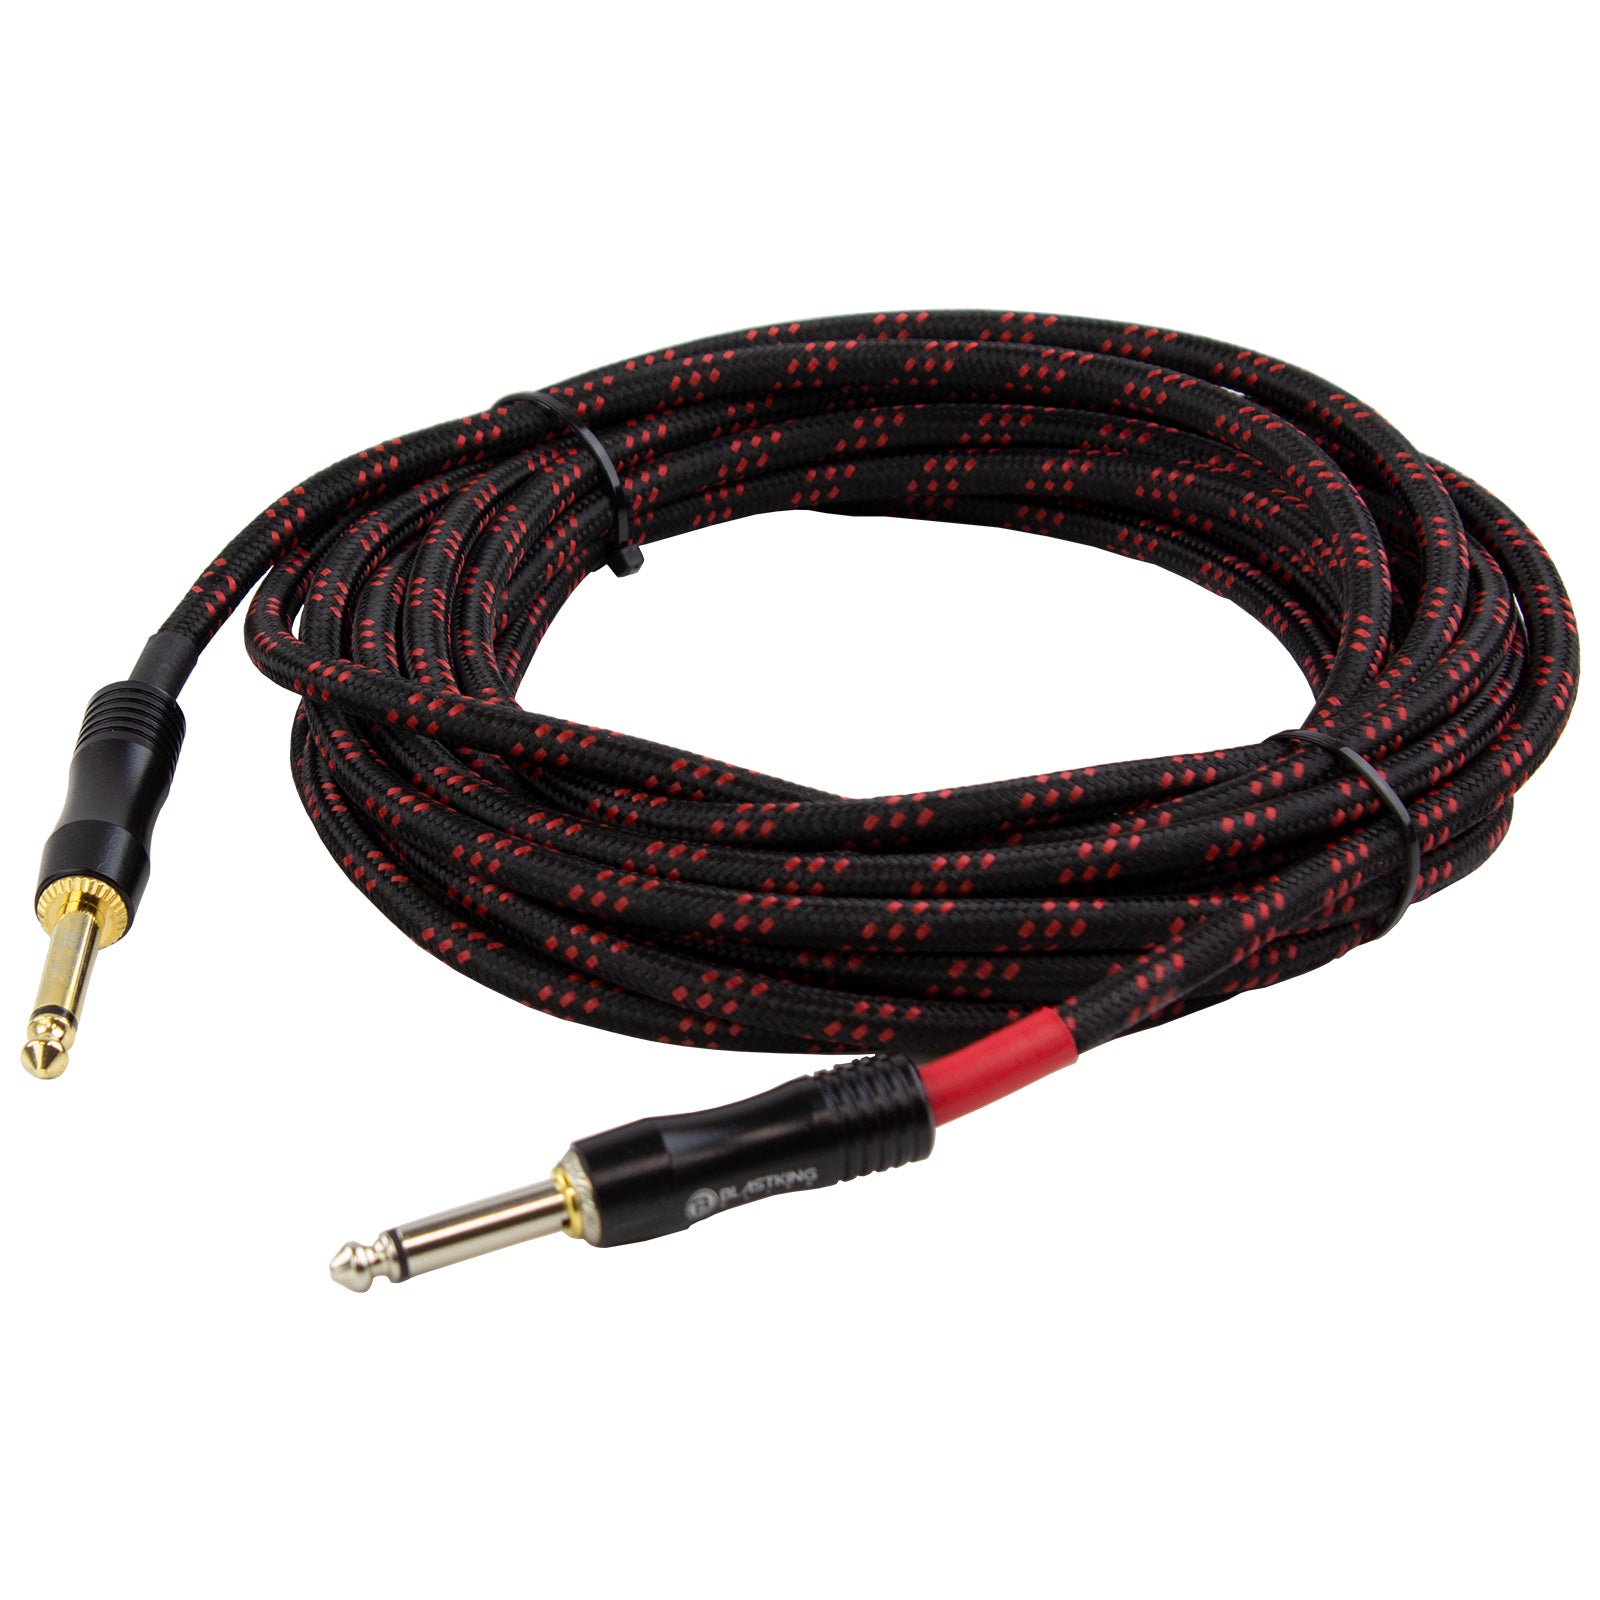 Blastking CGTR-20BR Noiseless Guitar Cable